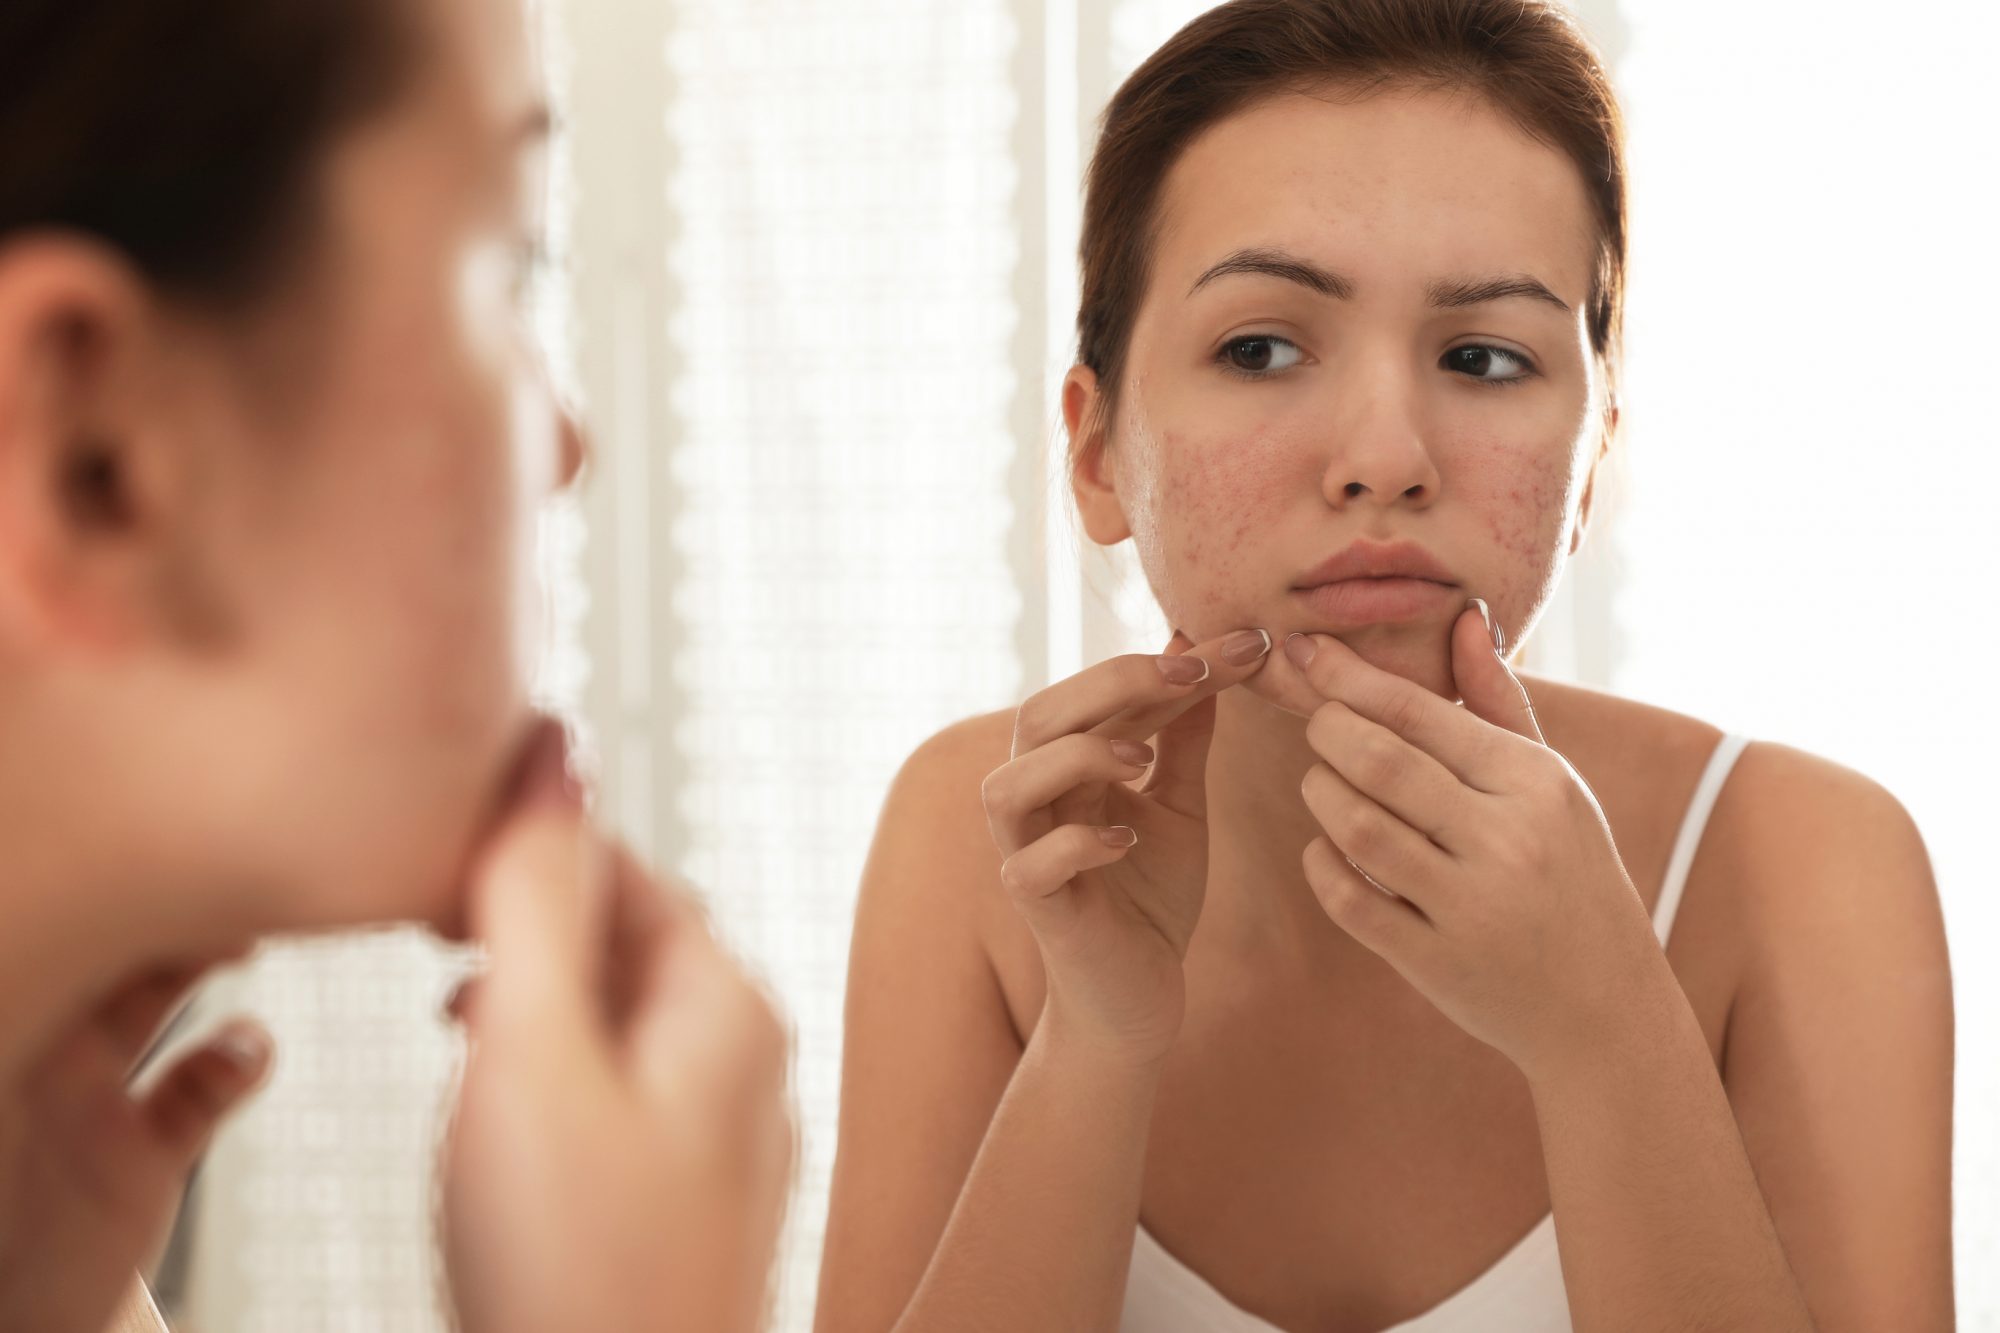 How to manage acne rosacea in times of stress